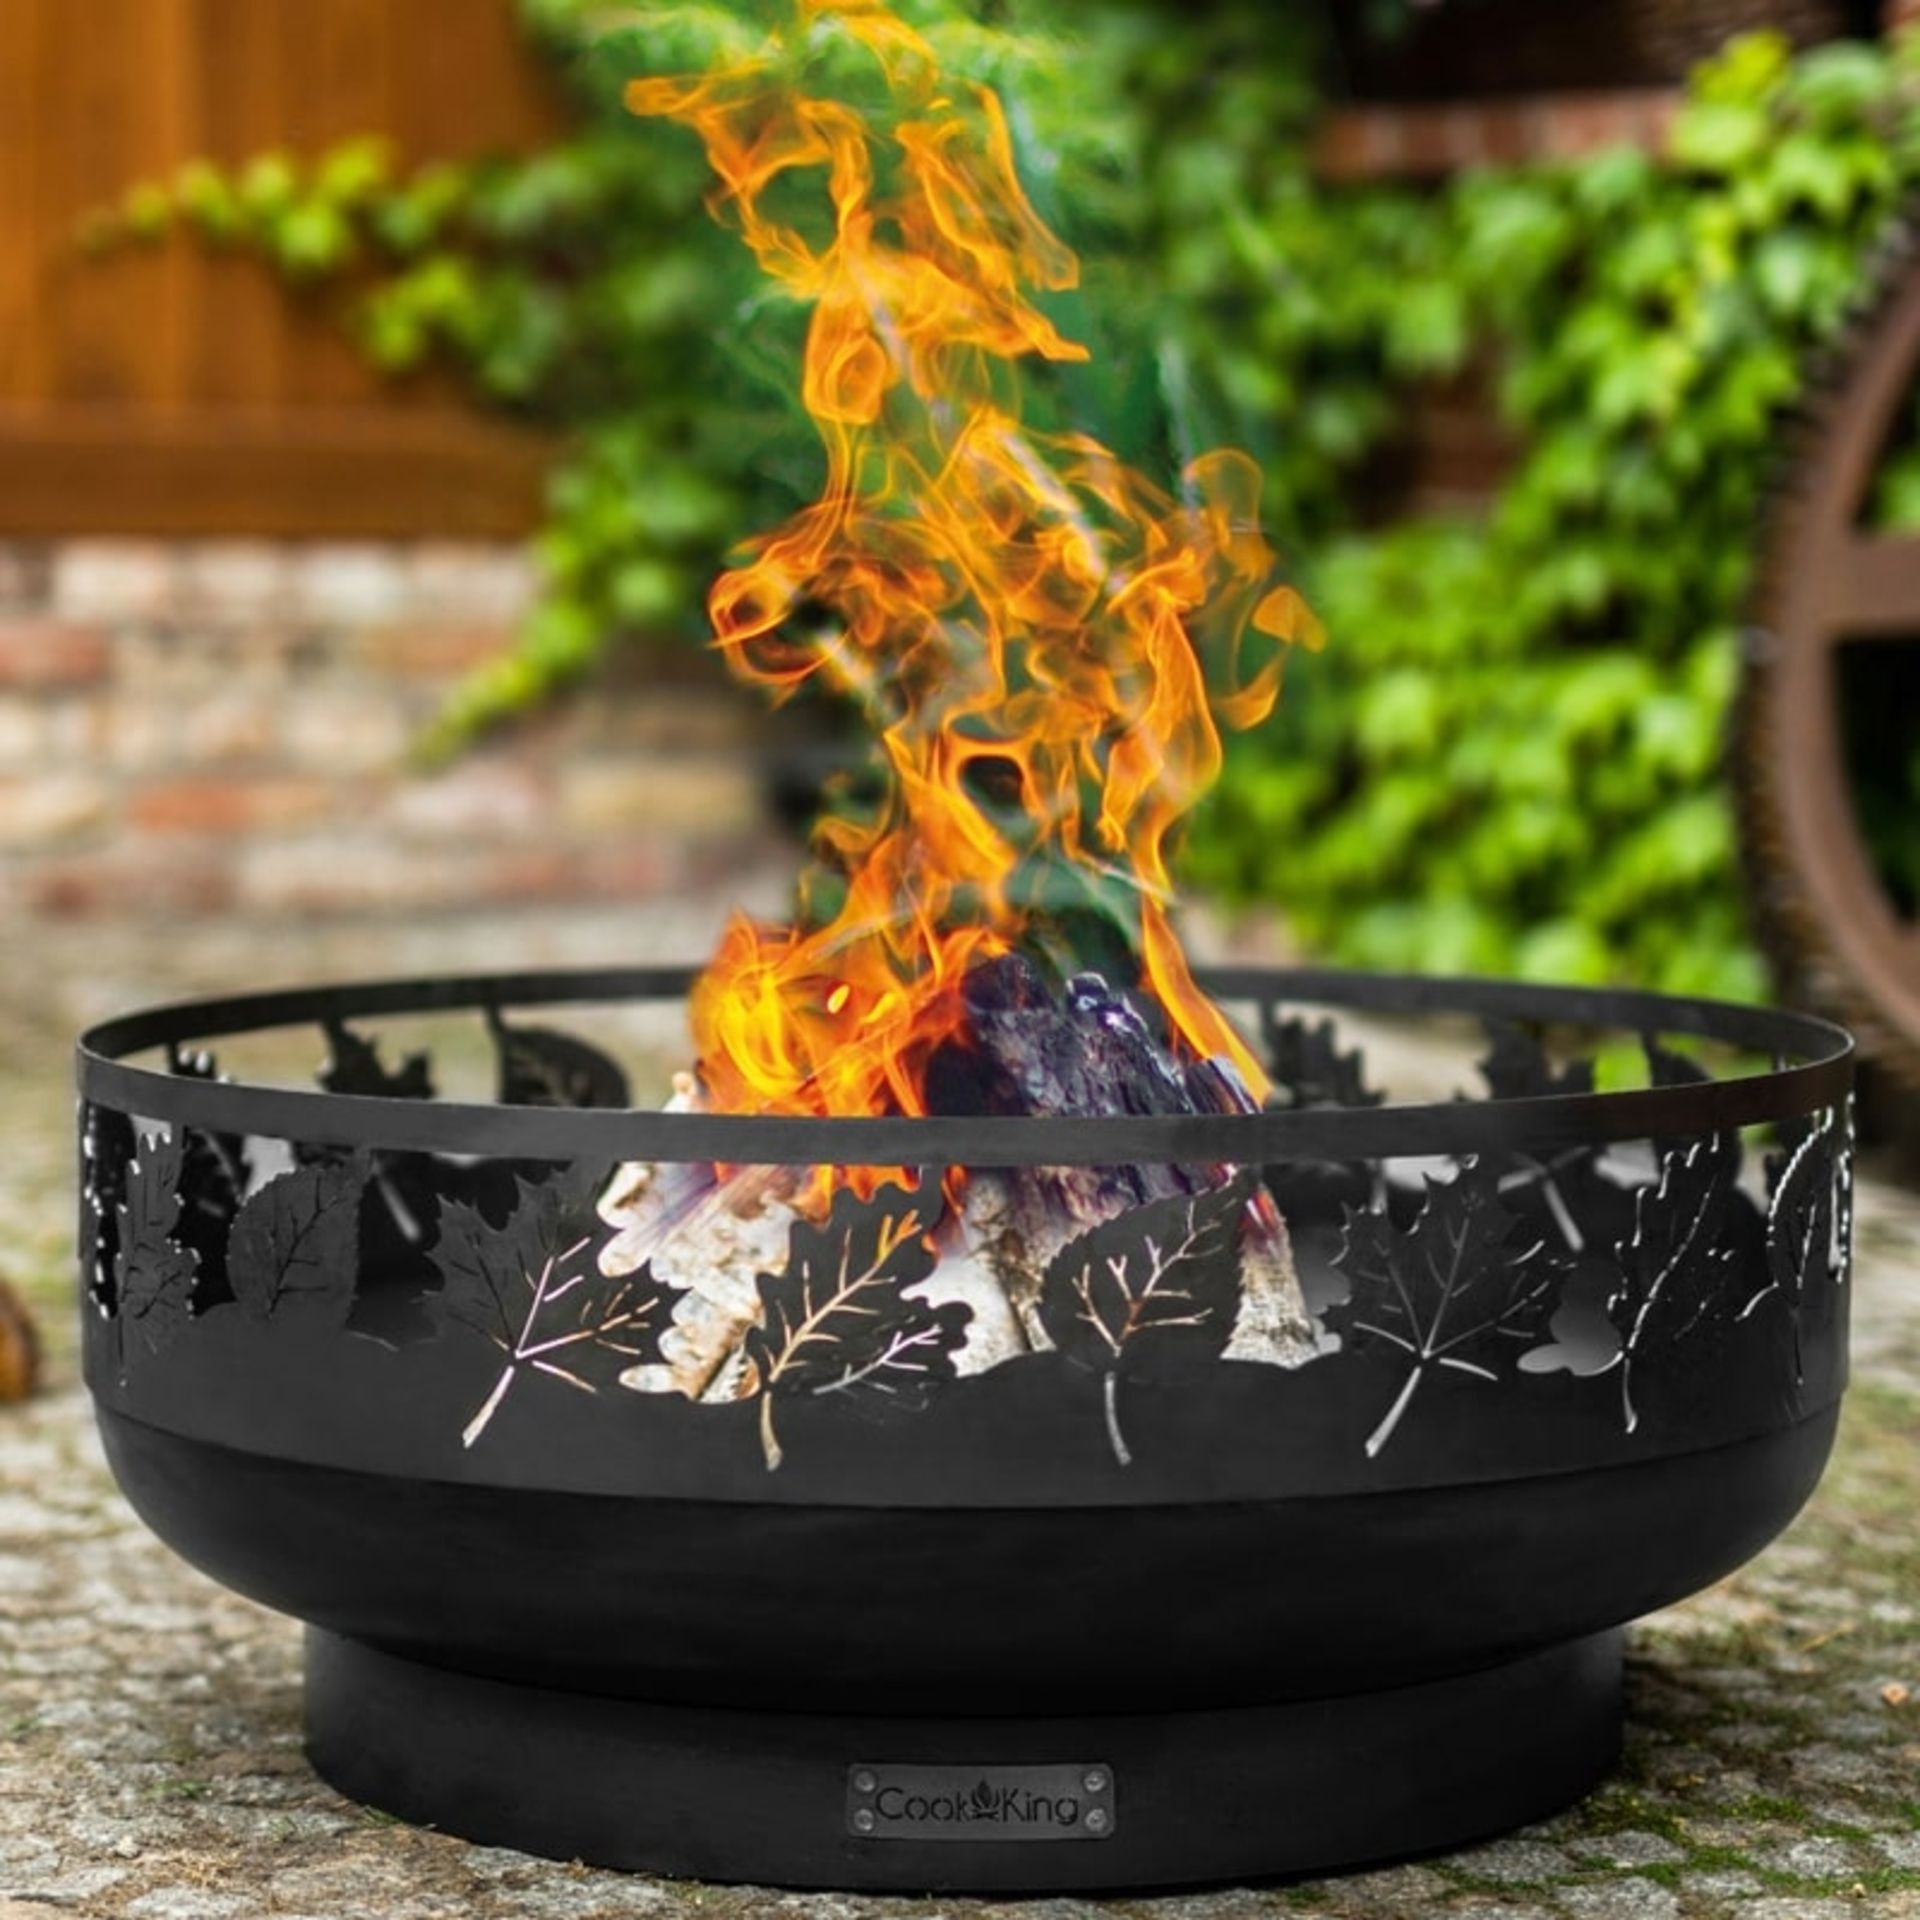 Cook King Toronto 80cm Wood Burning Fire Bowl | 111286 (Please Note: No Original Packaging)